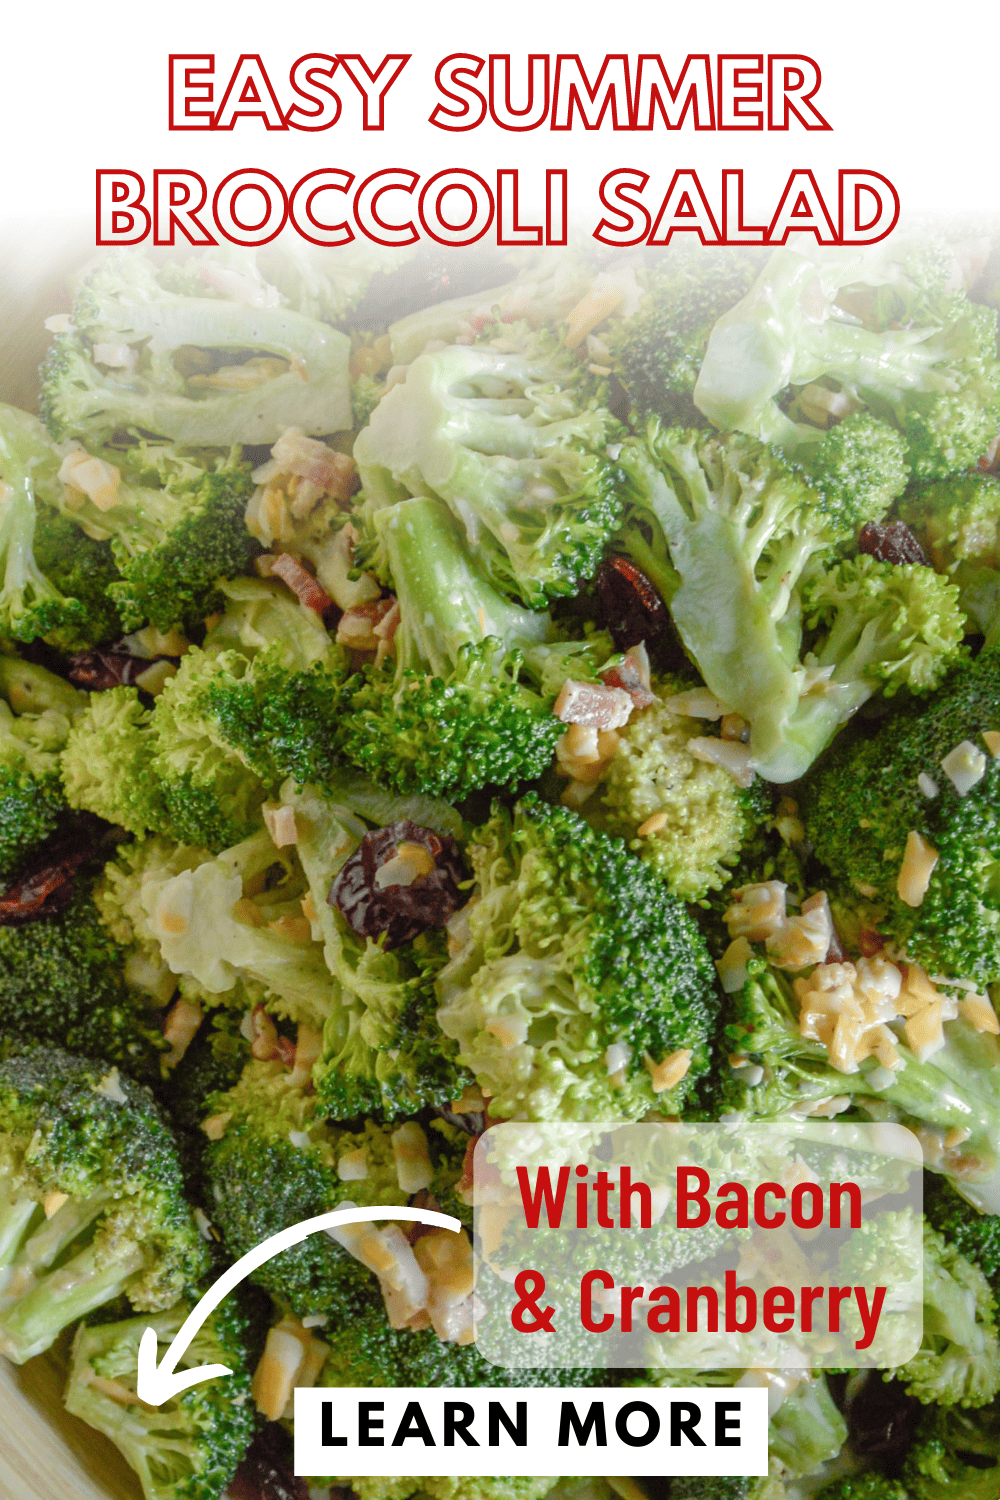 Easy Broccoli Salad with Bacon & Cranberry- A Great Crispy Summer Salad